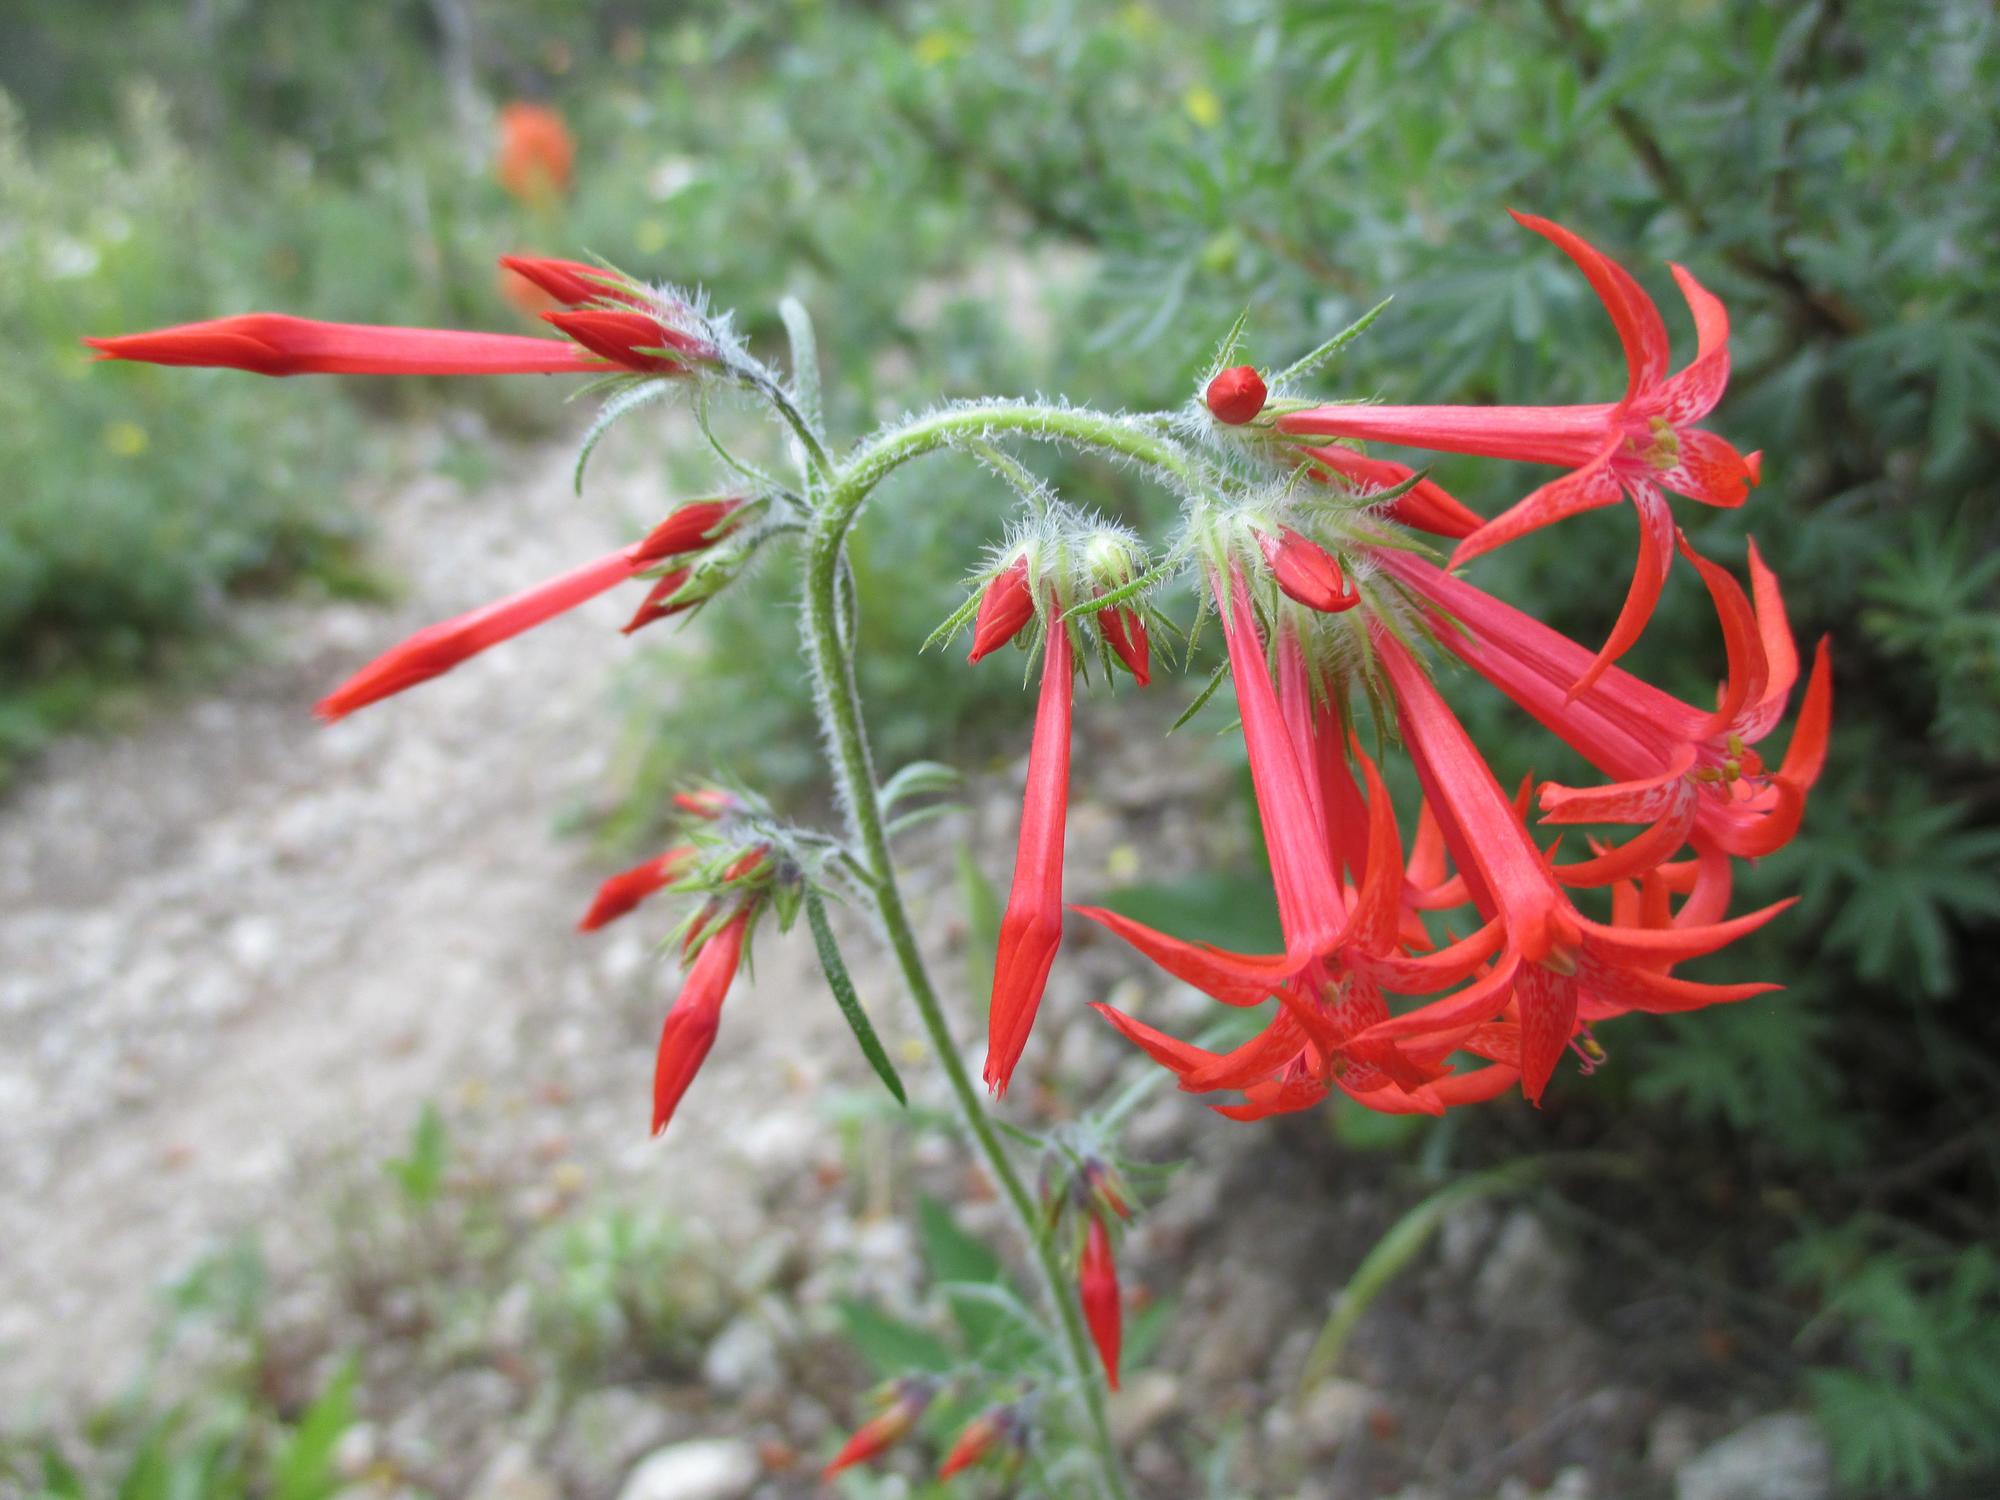 Close-up view of the red, tubular flowers of the scarlet gilia (Ipomopsis aggregata).